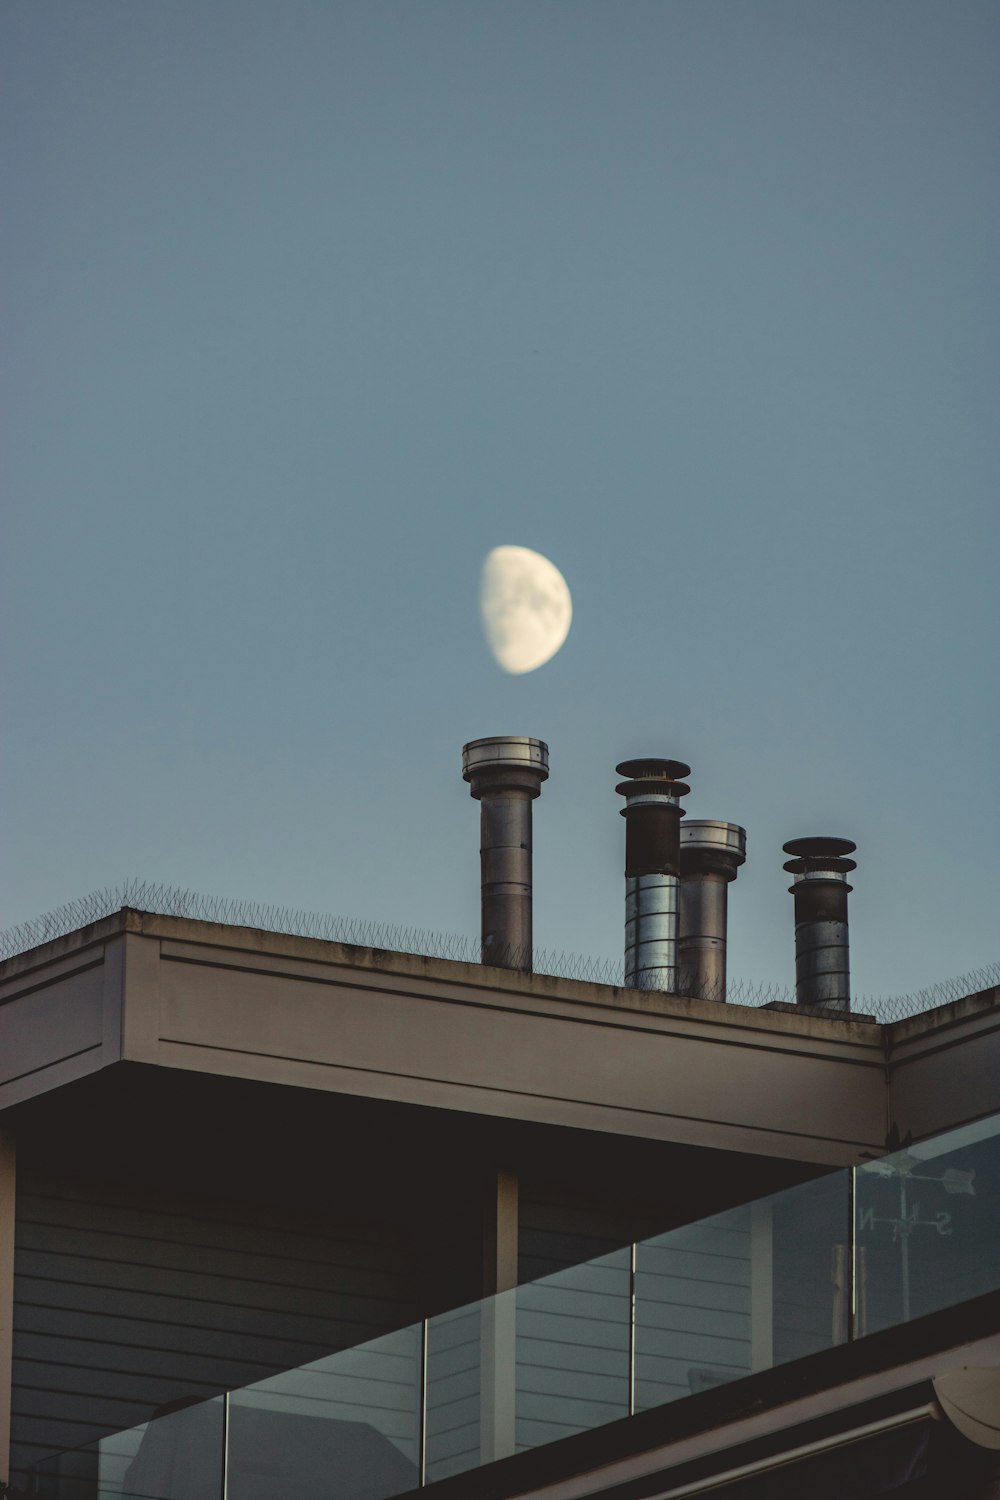 view of the moon on the sky and chimneys